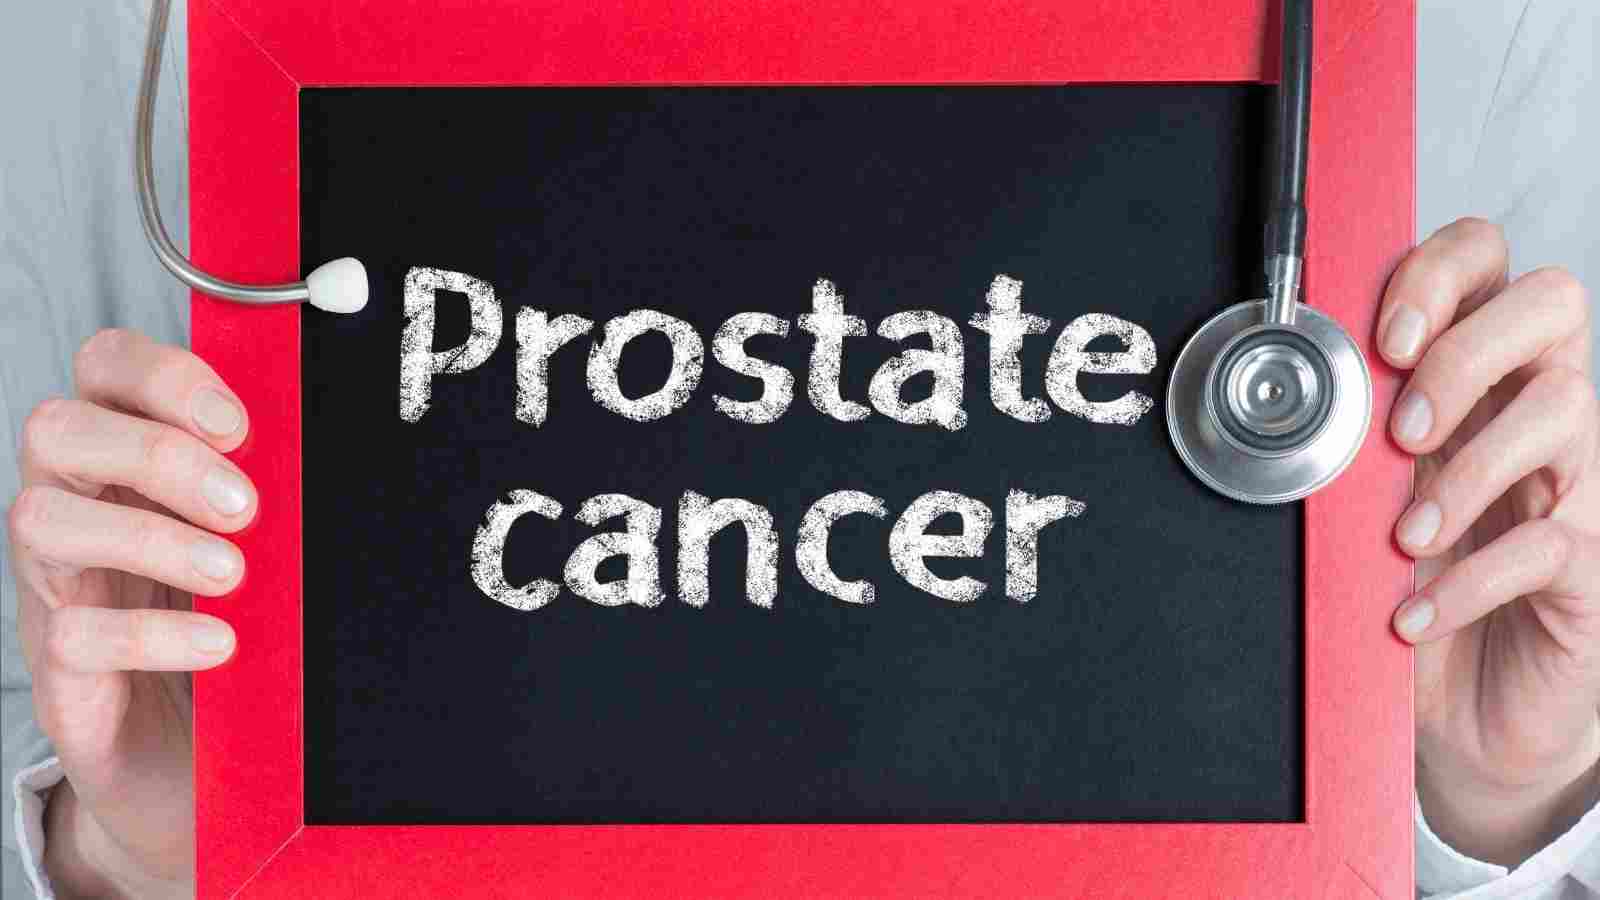 Prostate cancer only affects men